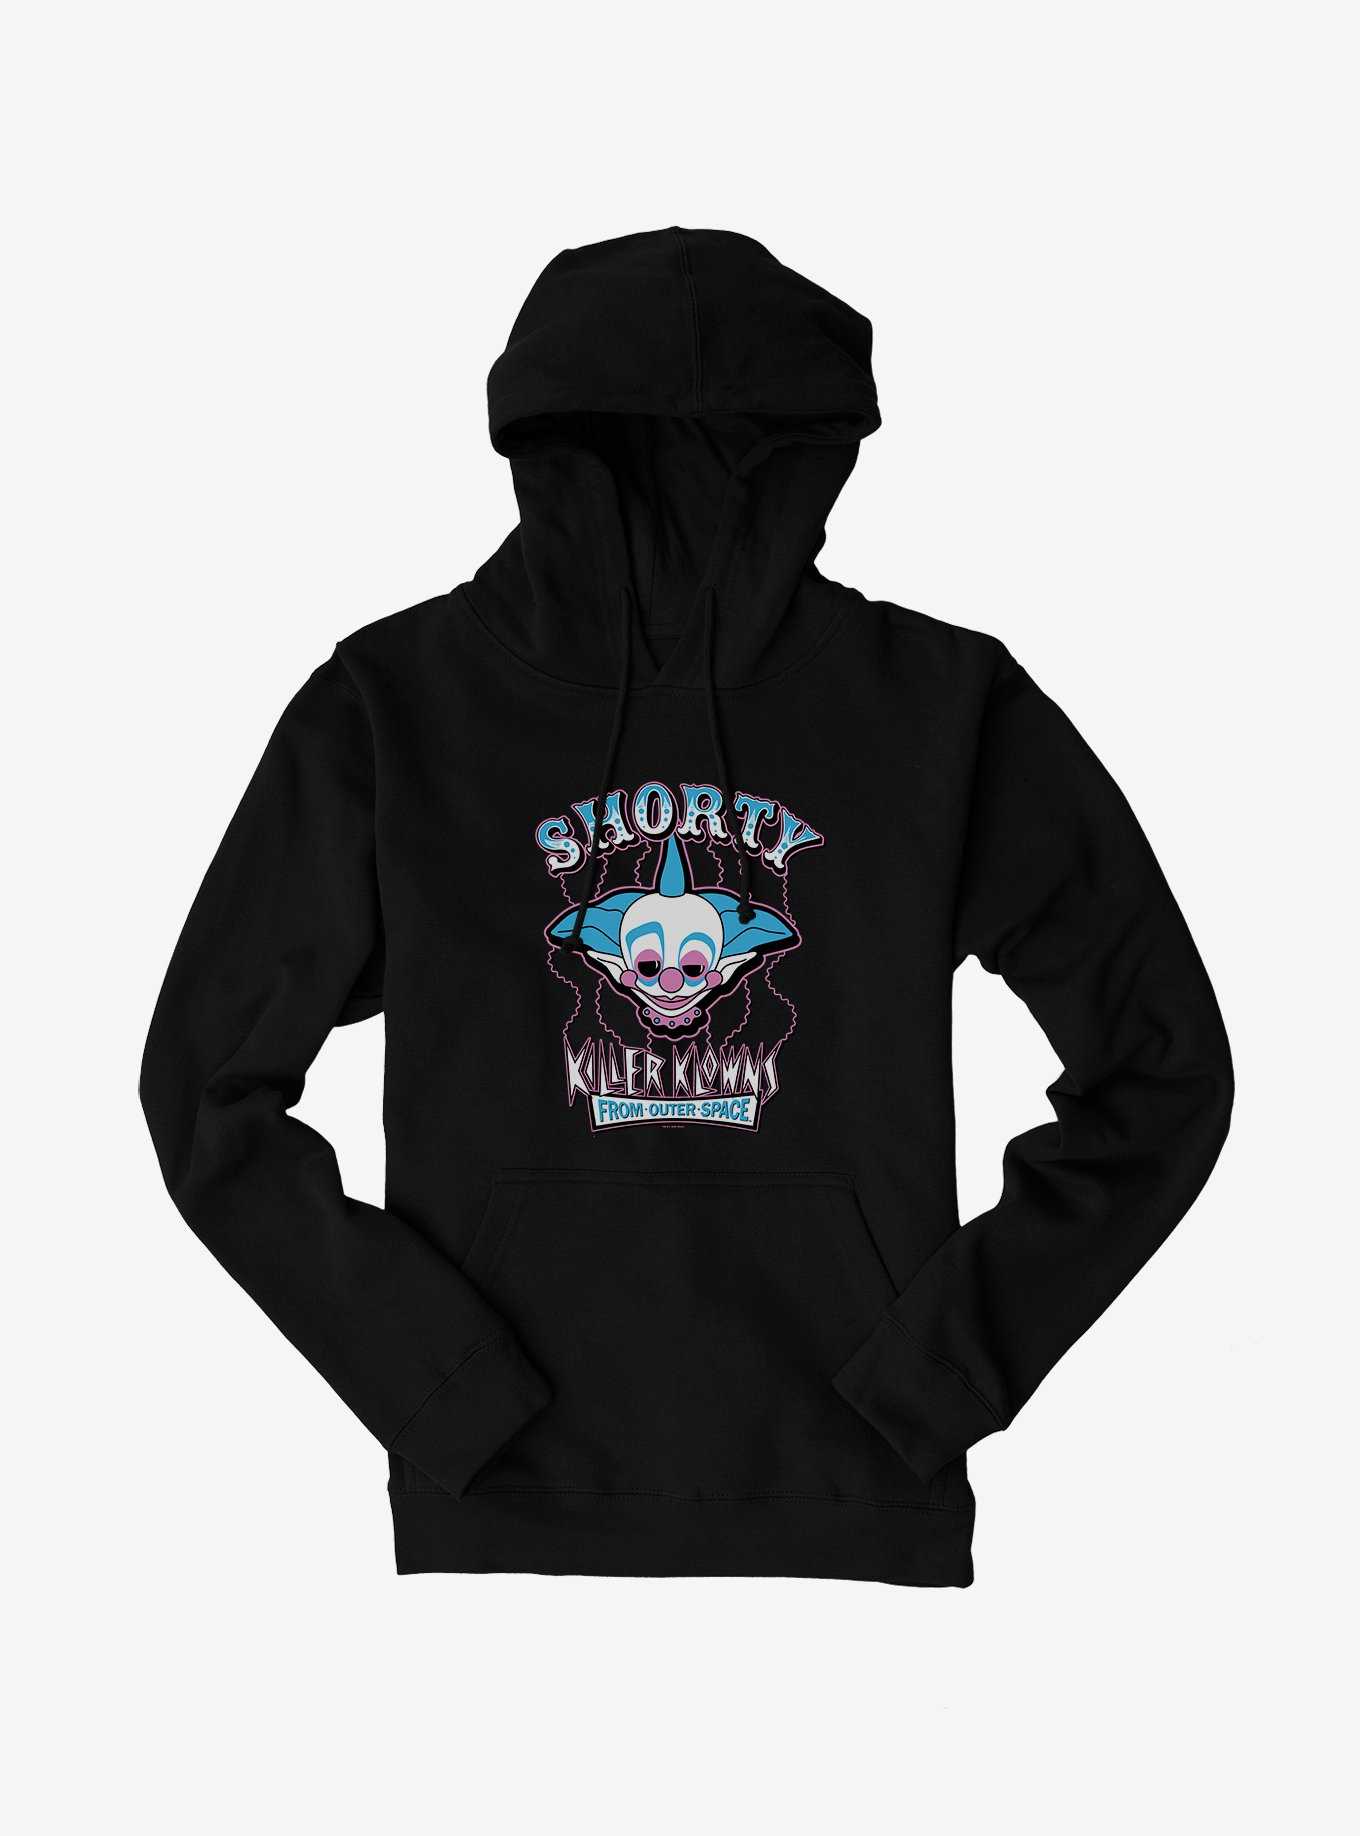 Killer Klowns From Outer Space Shorty Hoodie, , hi-res